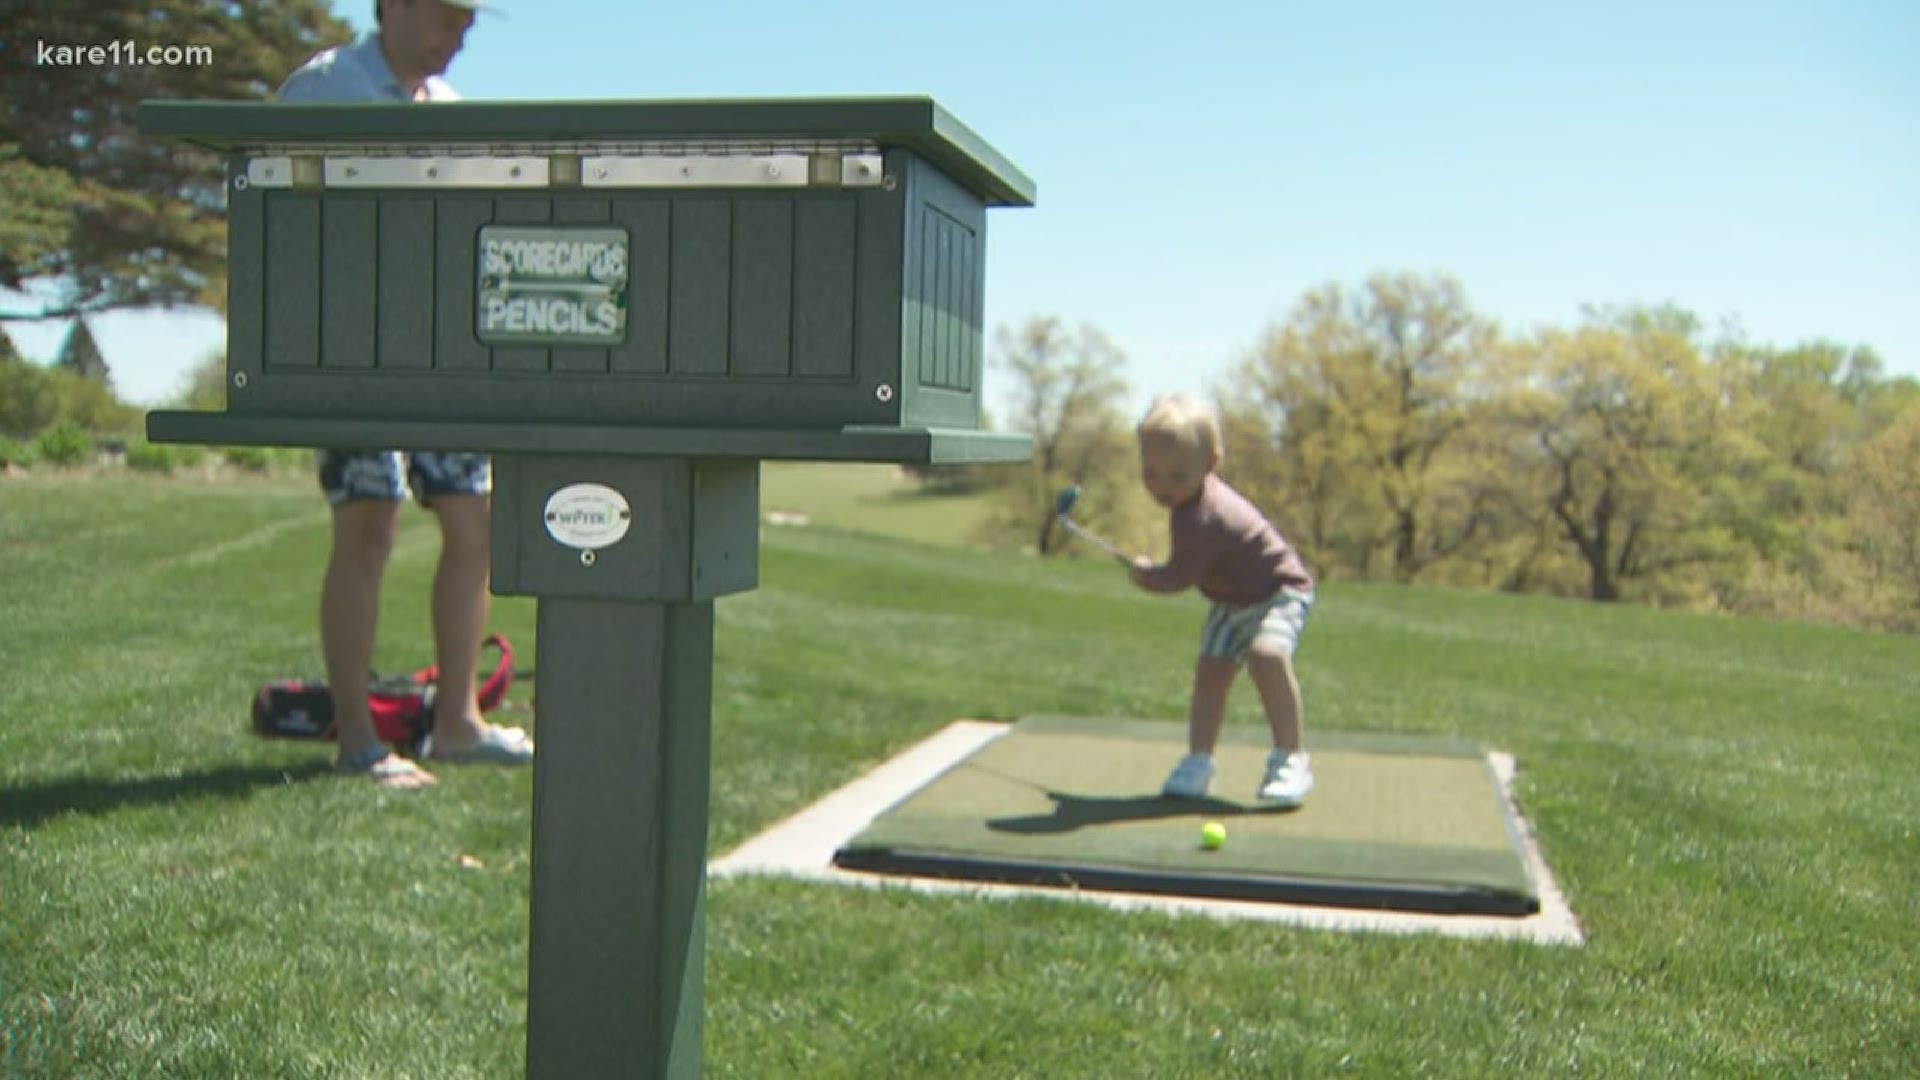 Six hole, par 3 envisioned by Annika Sorenstam and Arnold Palmer opens for play.